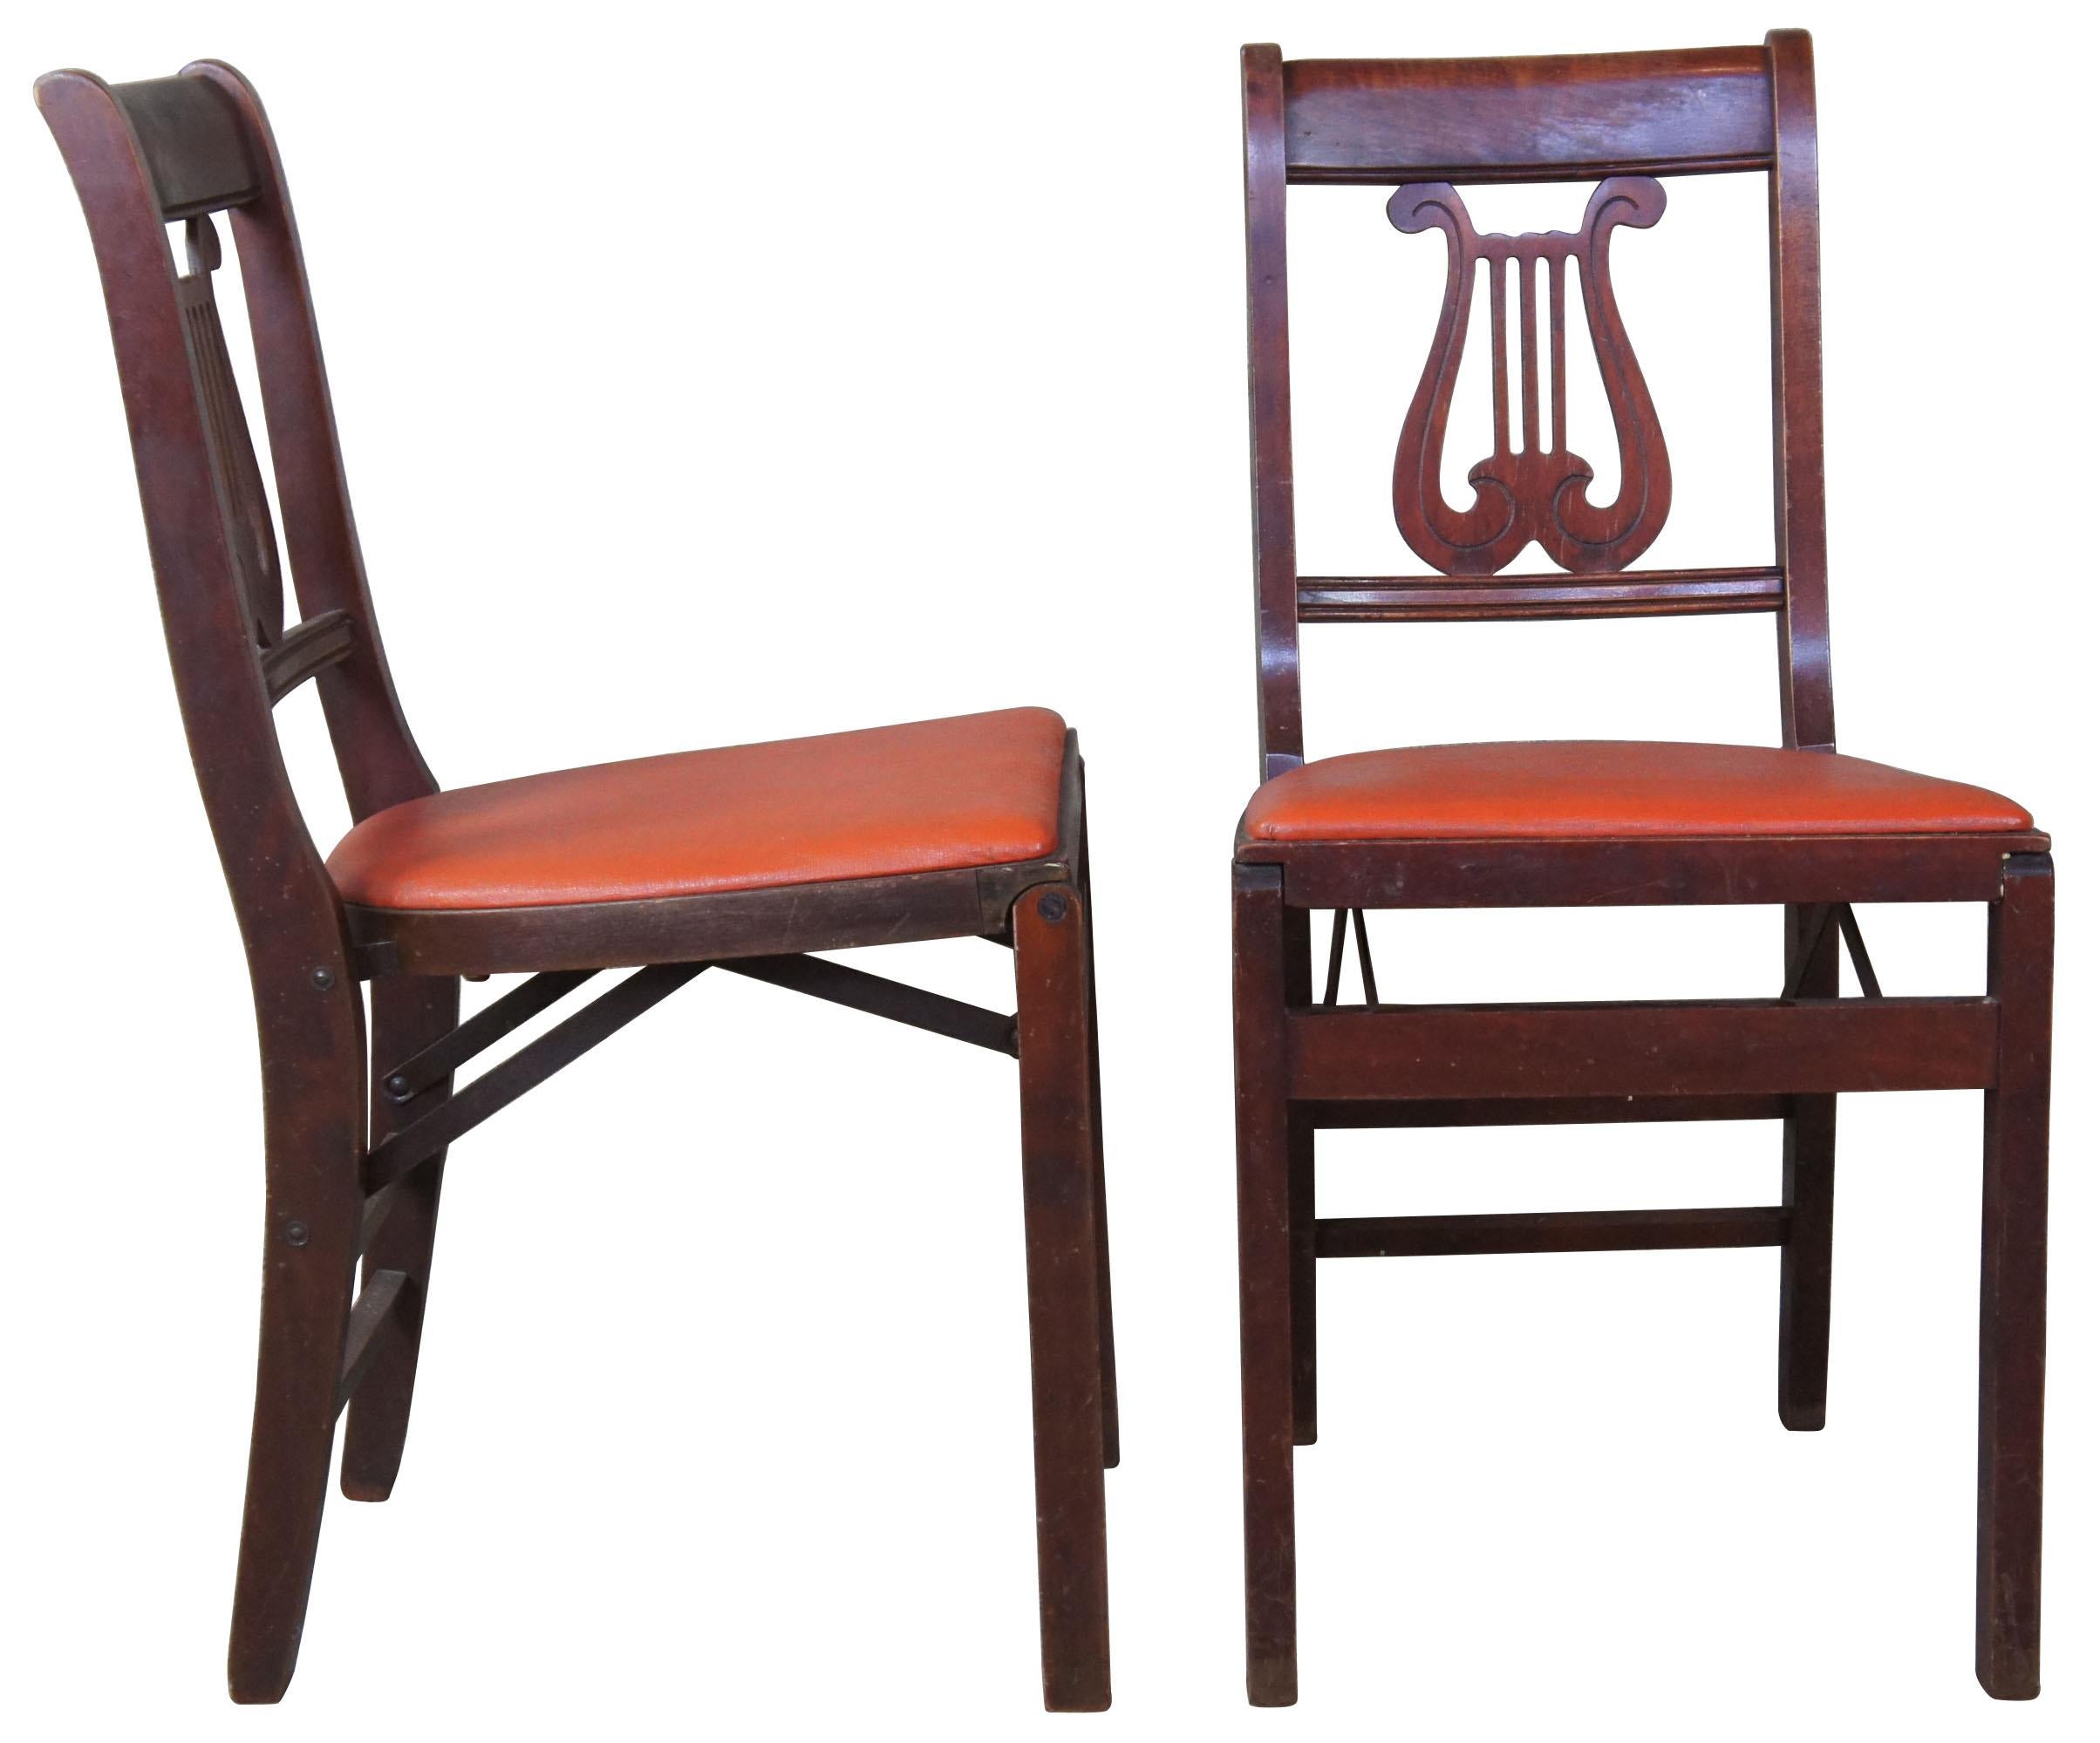 Four Mid-Century Modern folding stackable chairs by Stakmore furniture of New York. Features a wood frame and orange vinyl seats. Stakmore, the Aristocrats of Folding Furniture.

Measure: Depth folded - 6